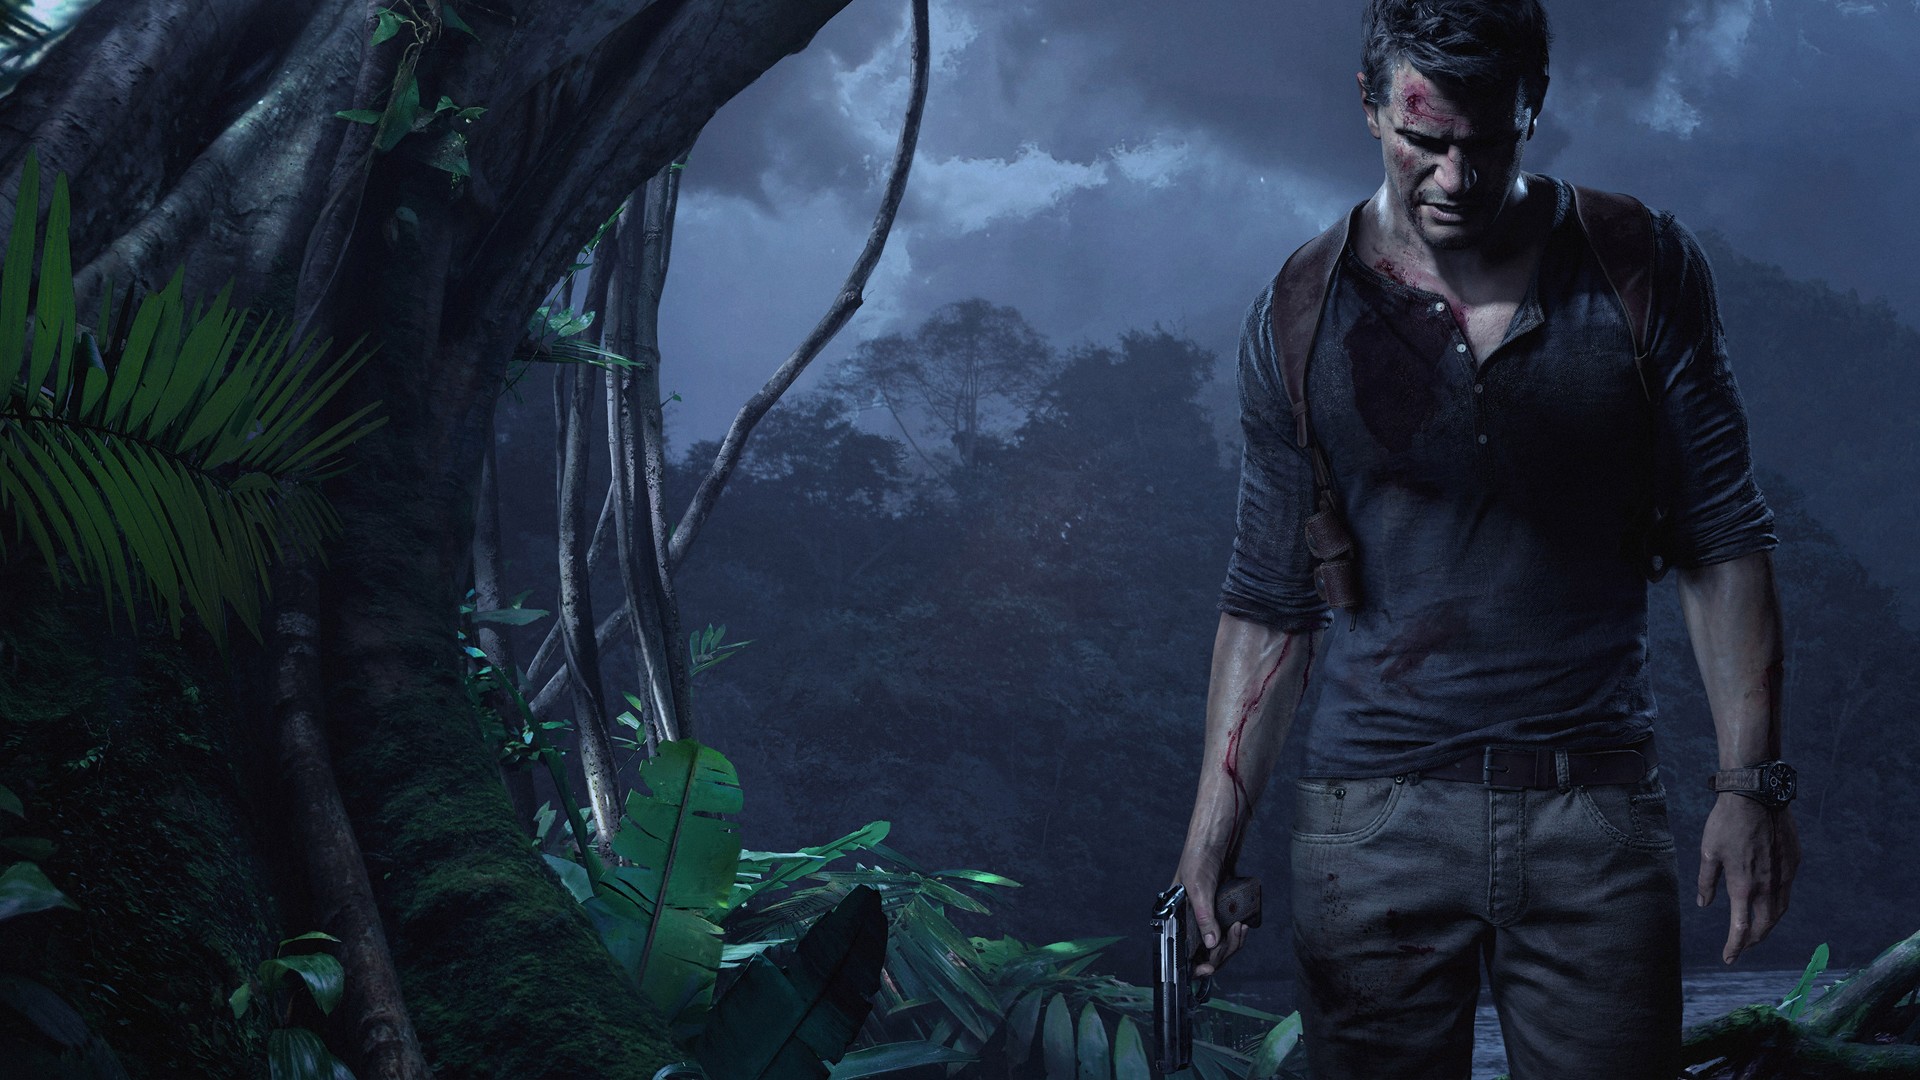 Uncharted 4: A Thief's End Wallpaper